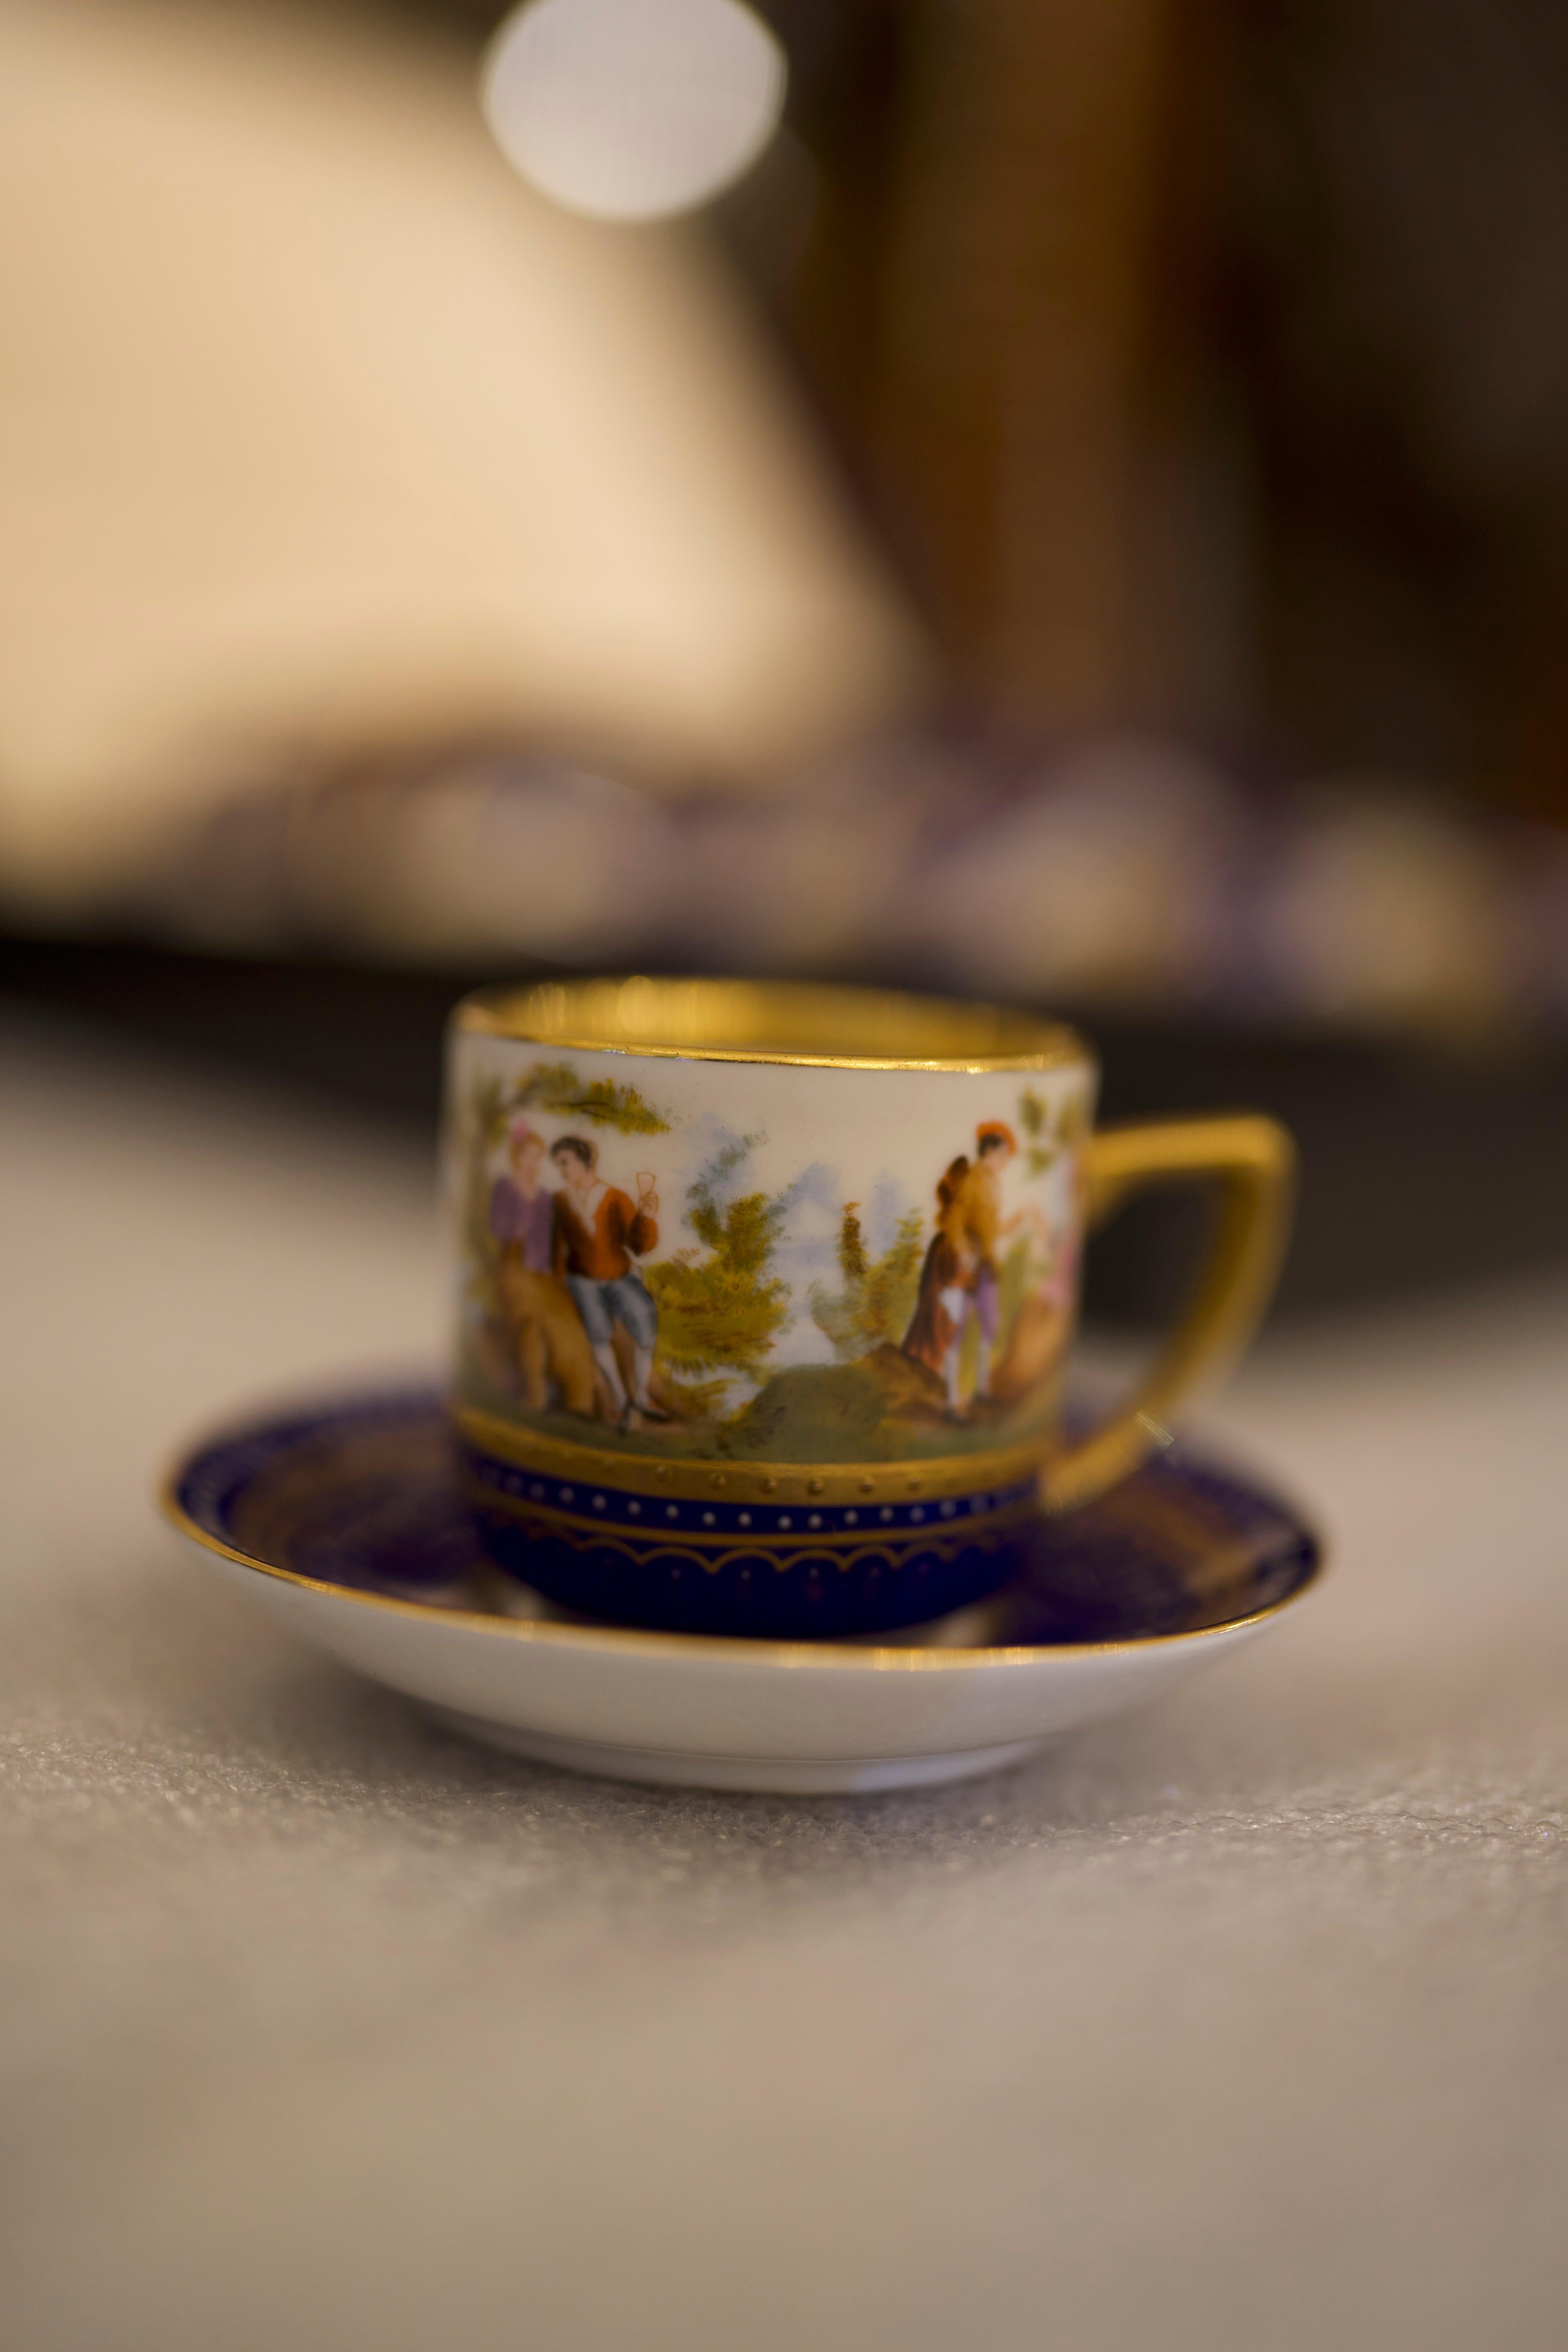 19th Century Porcelain, 12 Piece Painted Cups and Saucers Cobalt Blue In Excellent Condition For Sale In Southall, GB